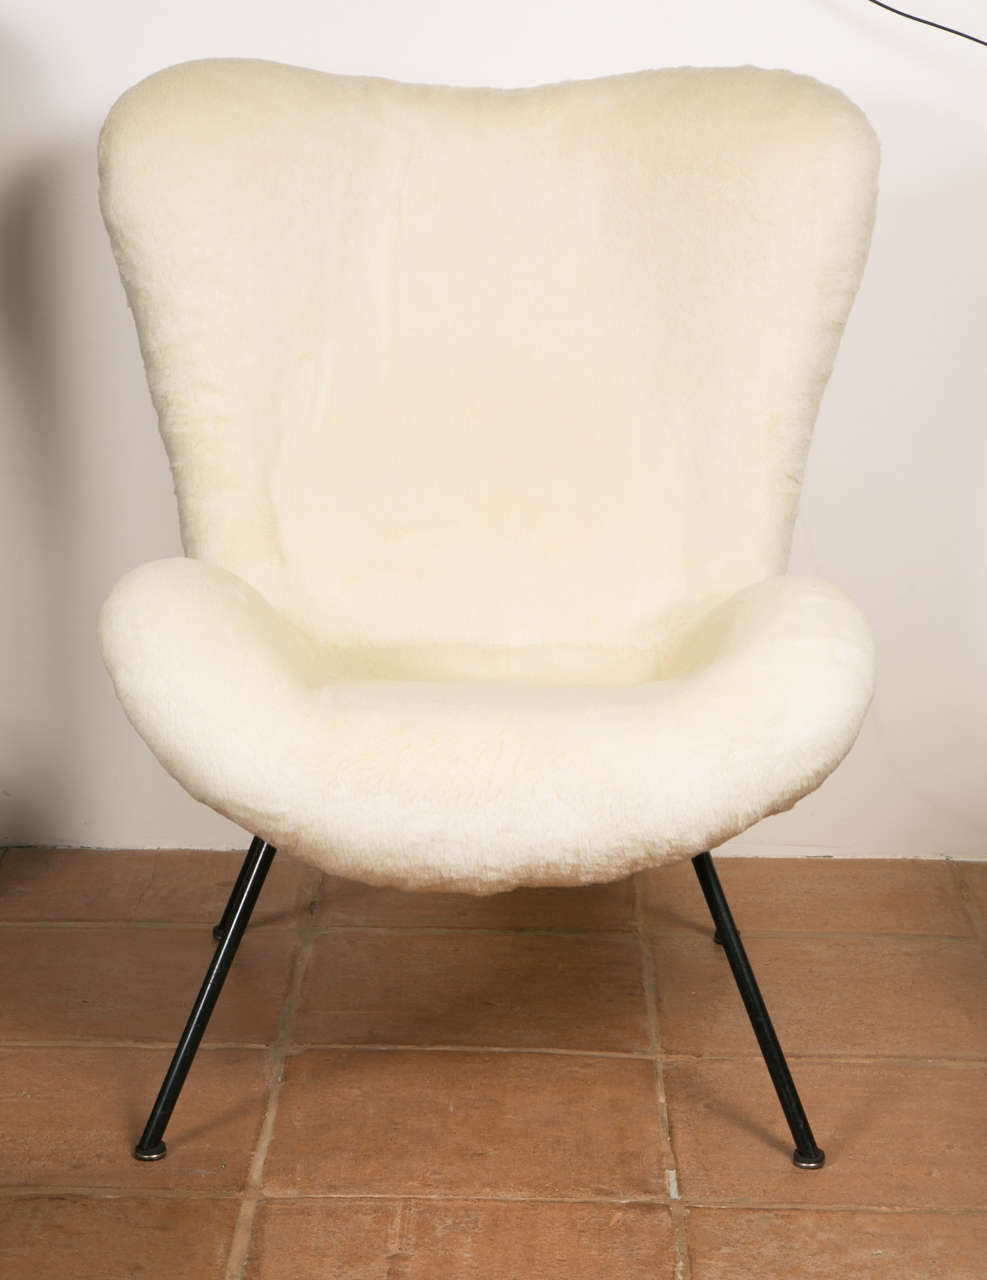 Rare Fritz Neth pair of chairs newly covered in raw white wool teddy bear cloth